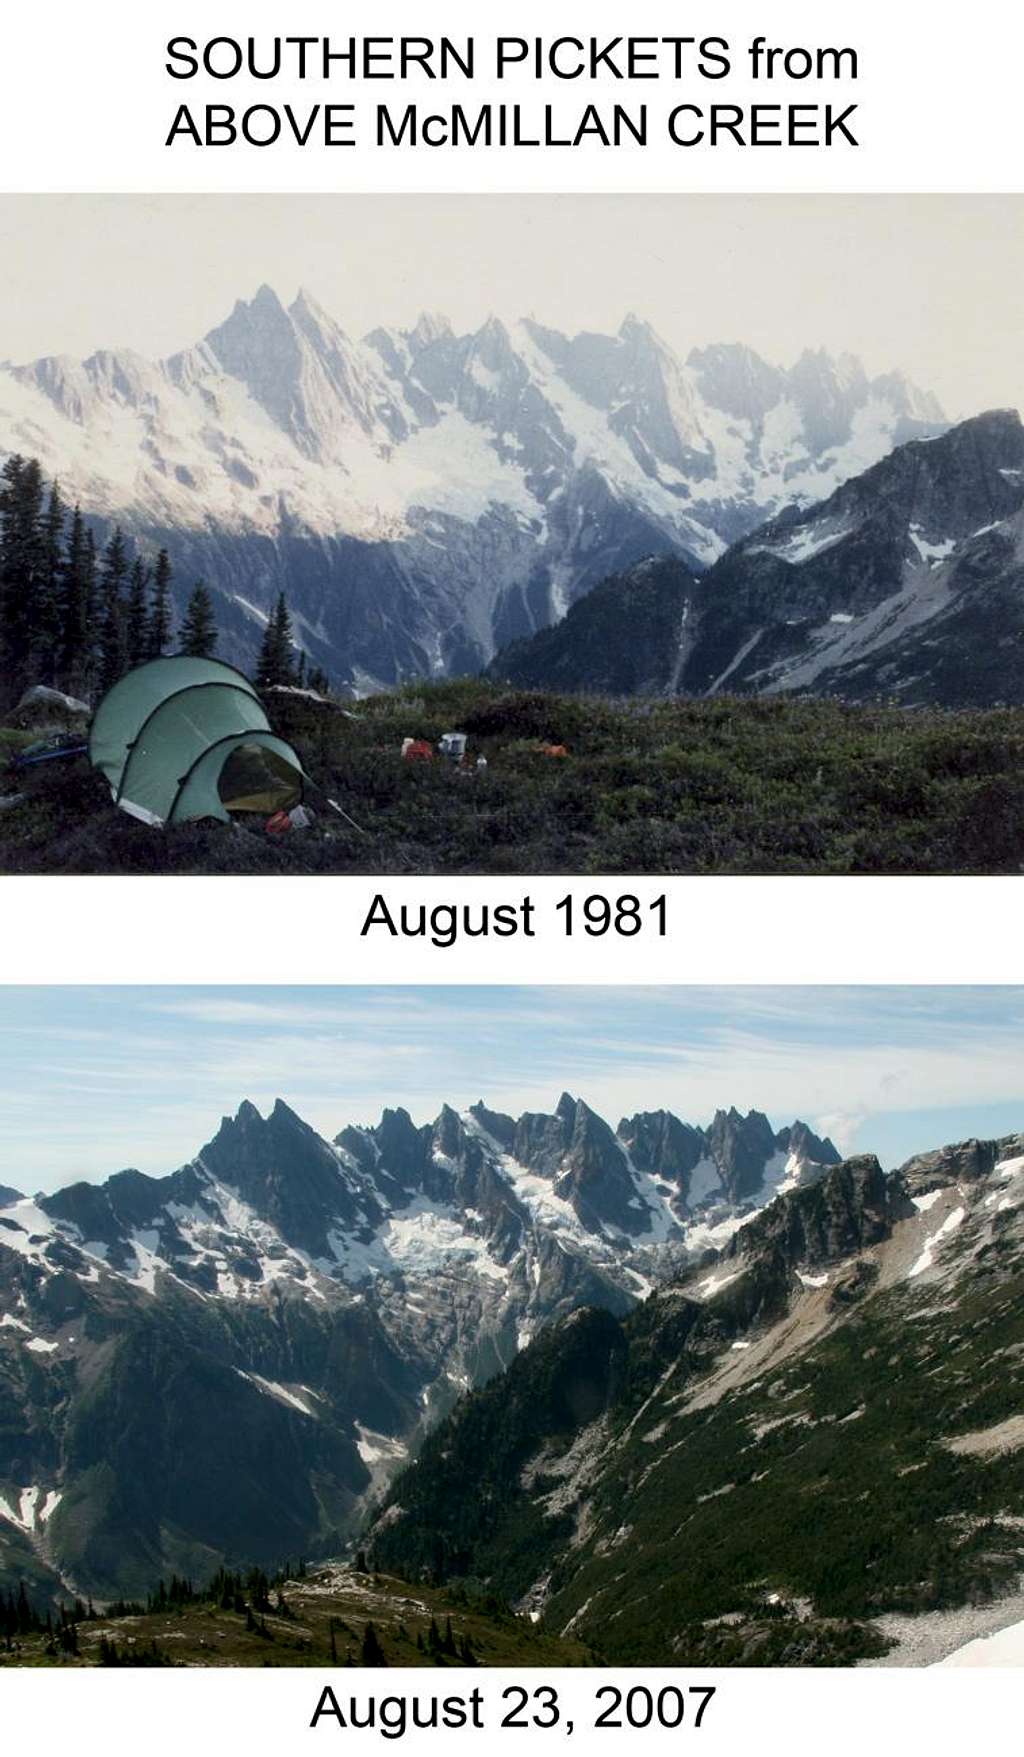 Southern Pickets in 1981 and 2007. The glaciers are getting smaller...